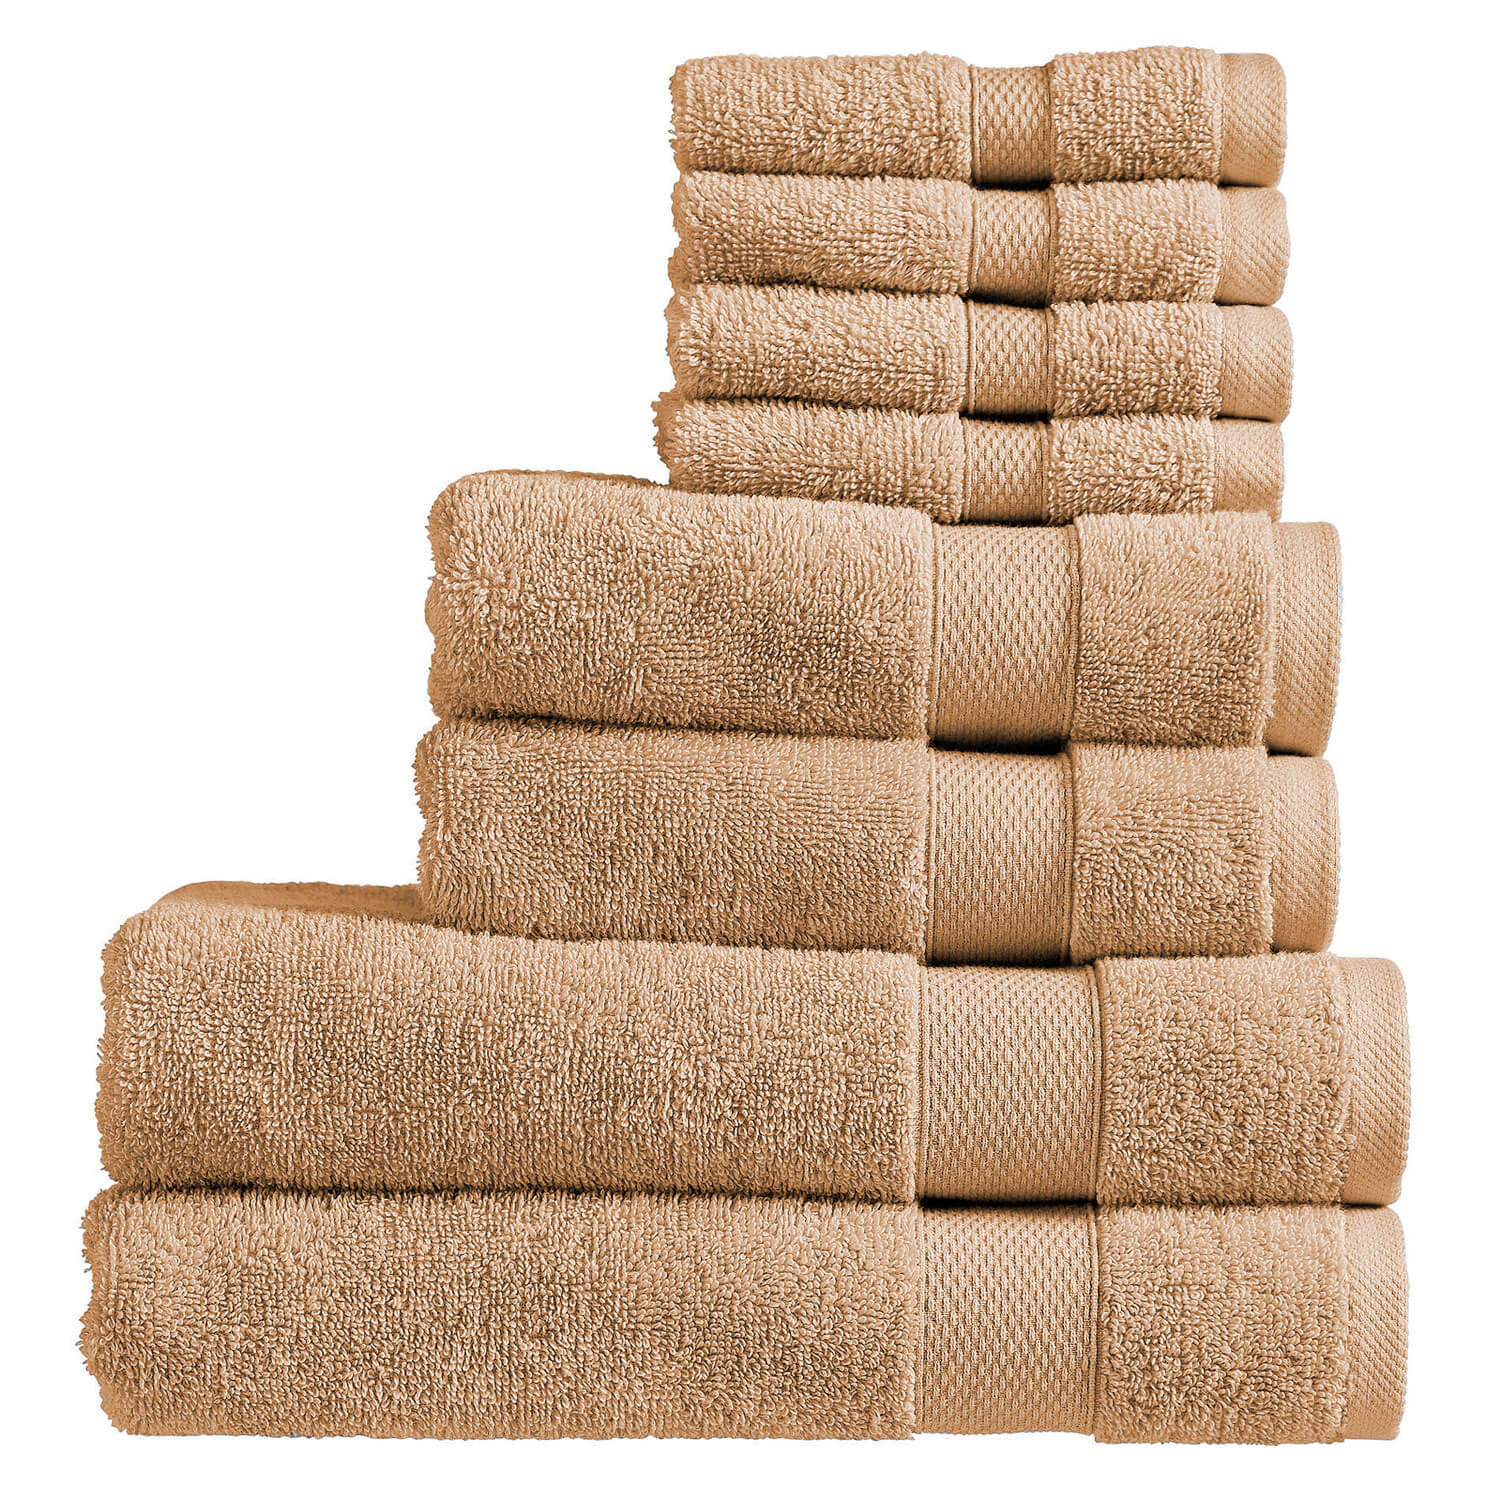 Christy Refresh Towels - Chai Latte 2 Shaws Department Stores